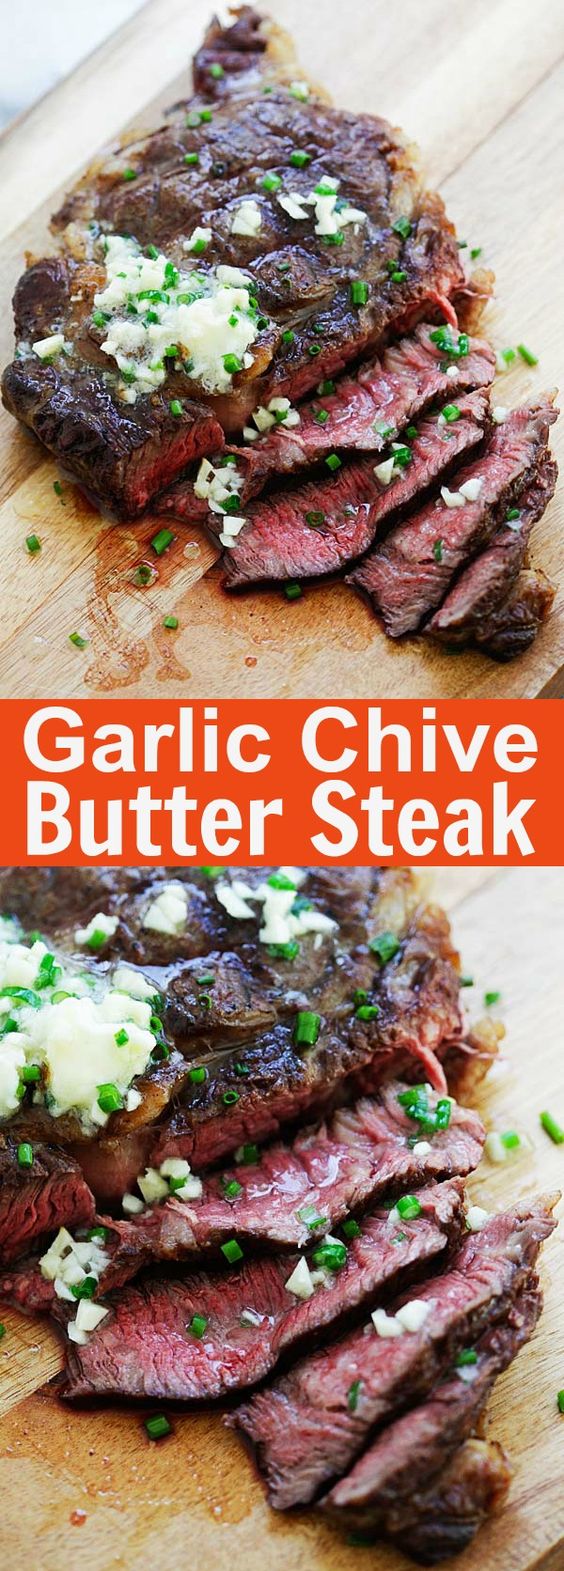 Garlic Chive Butter Steak - the juiciest and most tender steak with garlic chive butter. This steak takes 15 minutes on a grill and dinner is ready | rasamalaysia.com